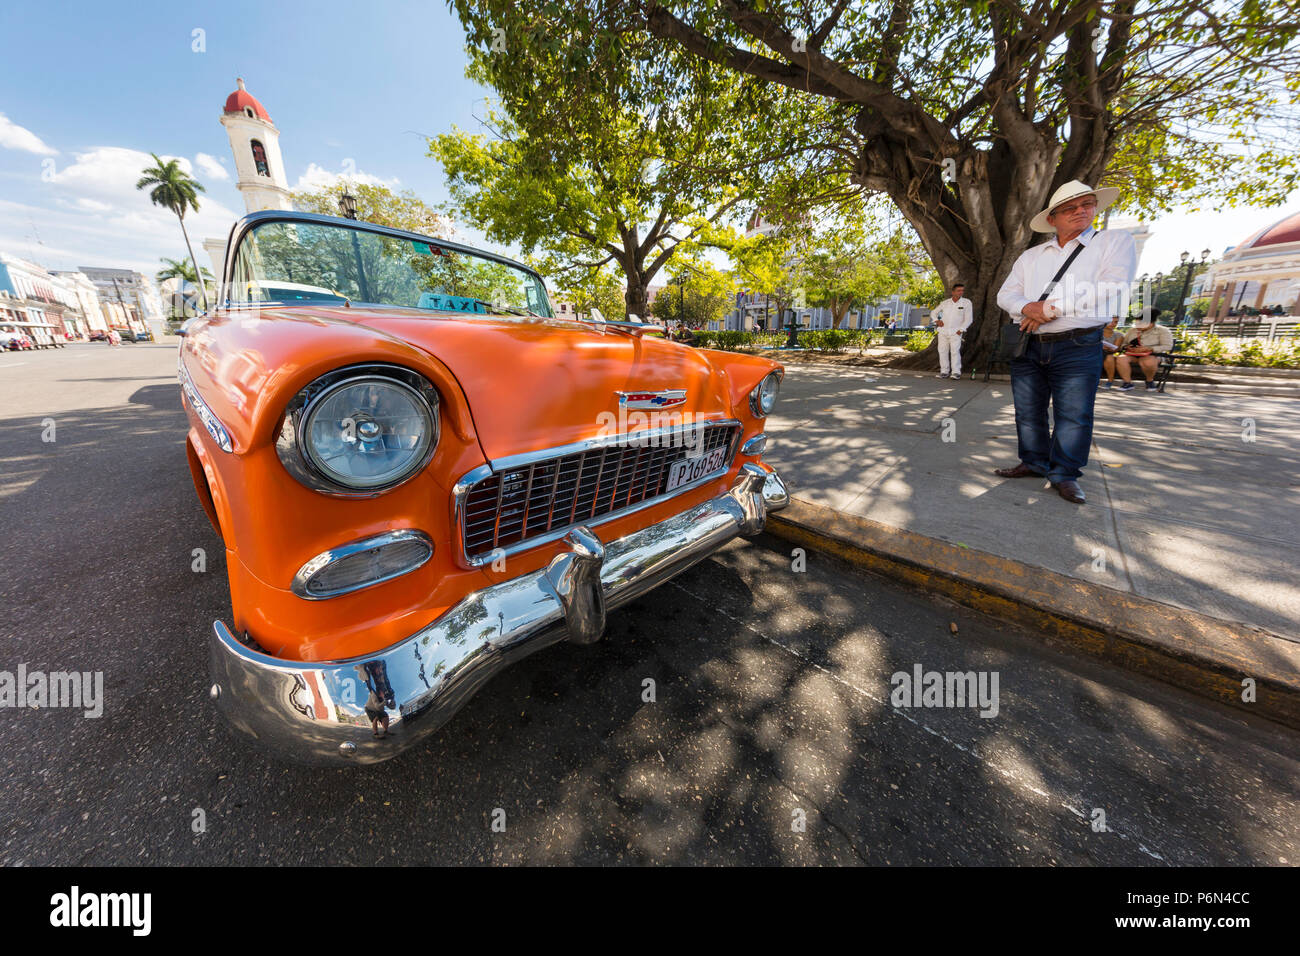 Classic 1950's Chevrolet Bel Air taxi, locally known as 'almendrones' in the town of Cienfuegos, Cuba. Stock Photo